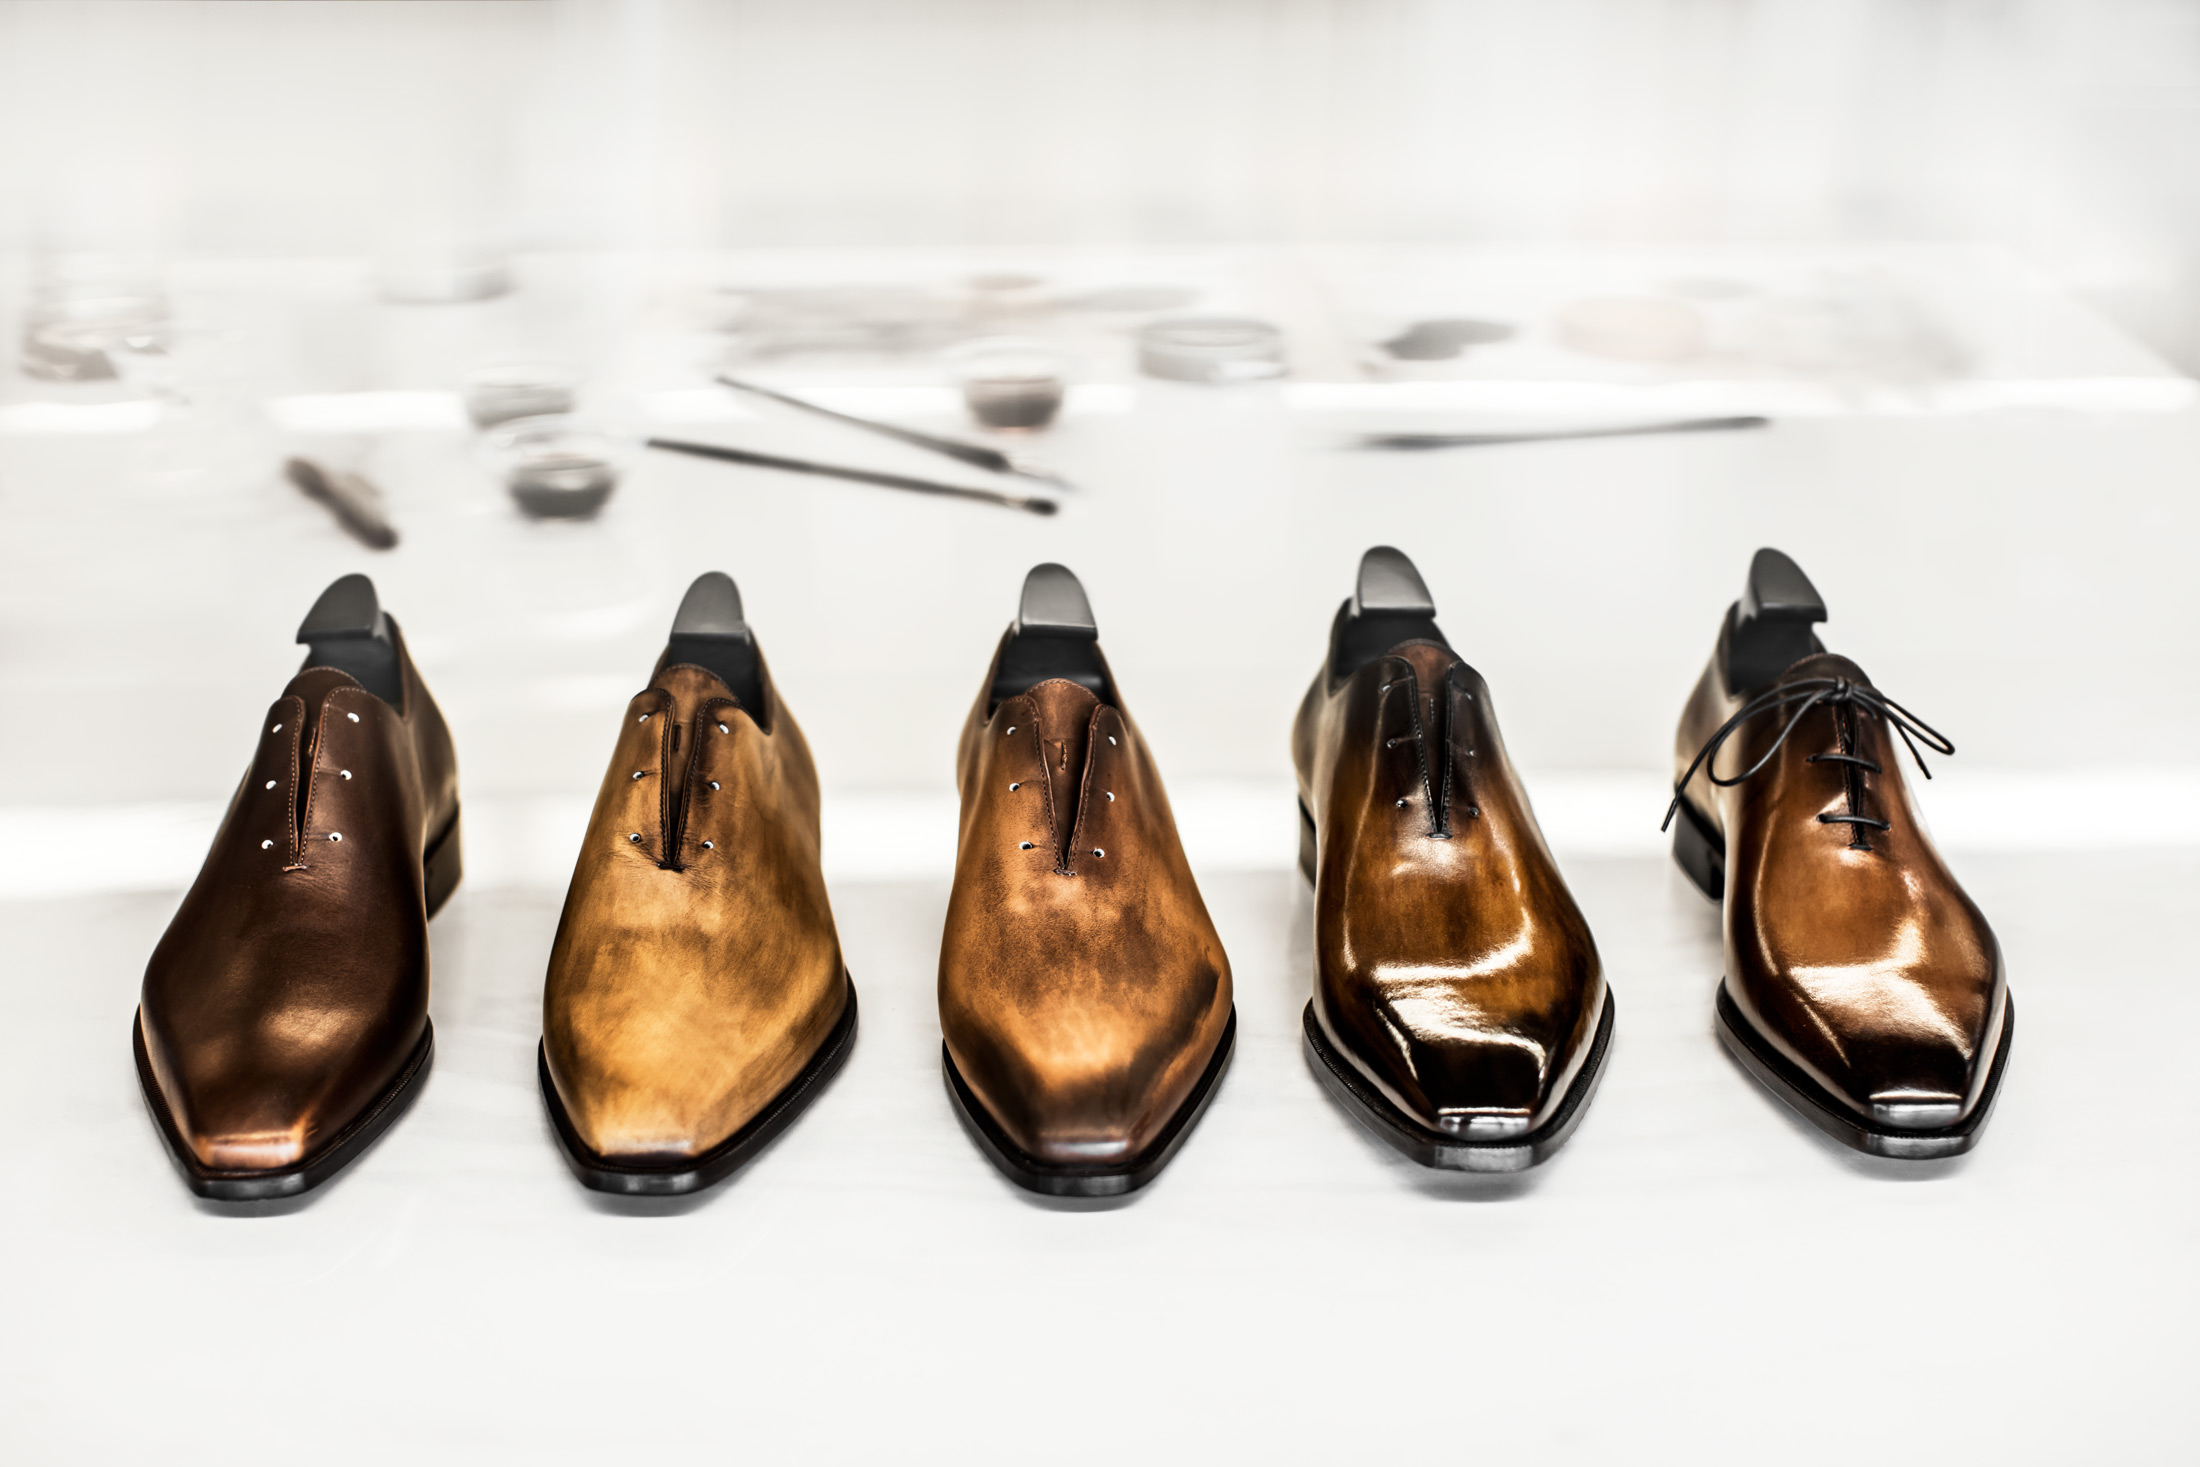 Berluti flagship on JD offers a series of new and classic collections of Berluti